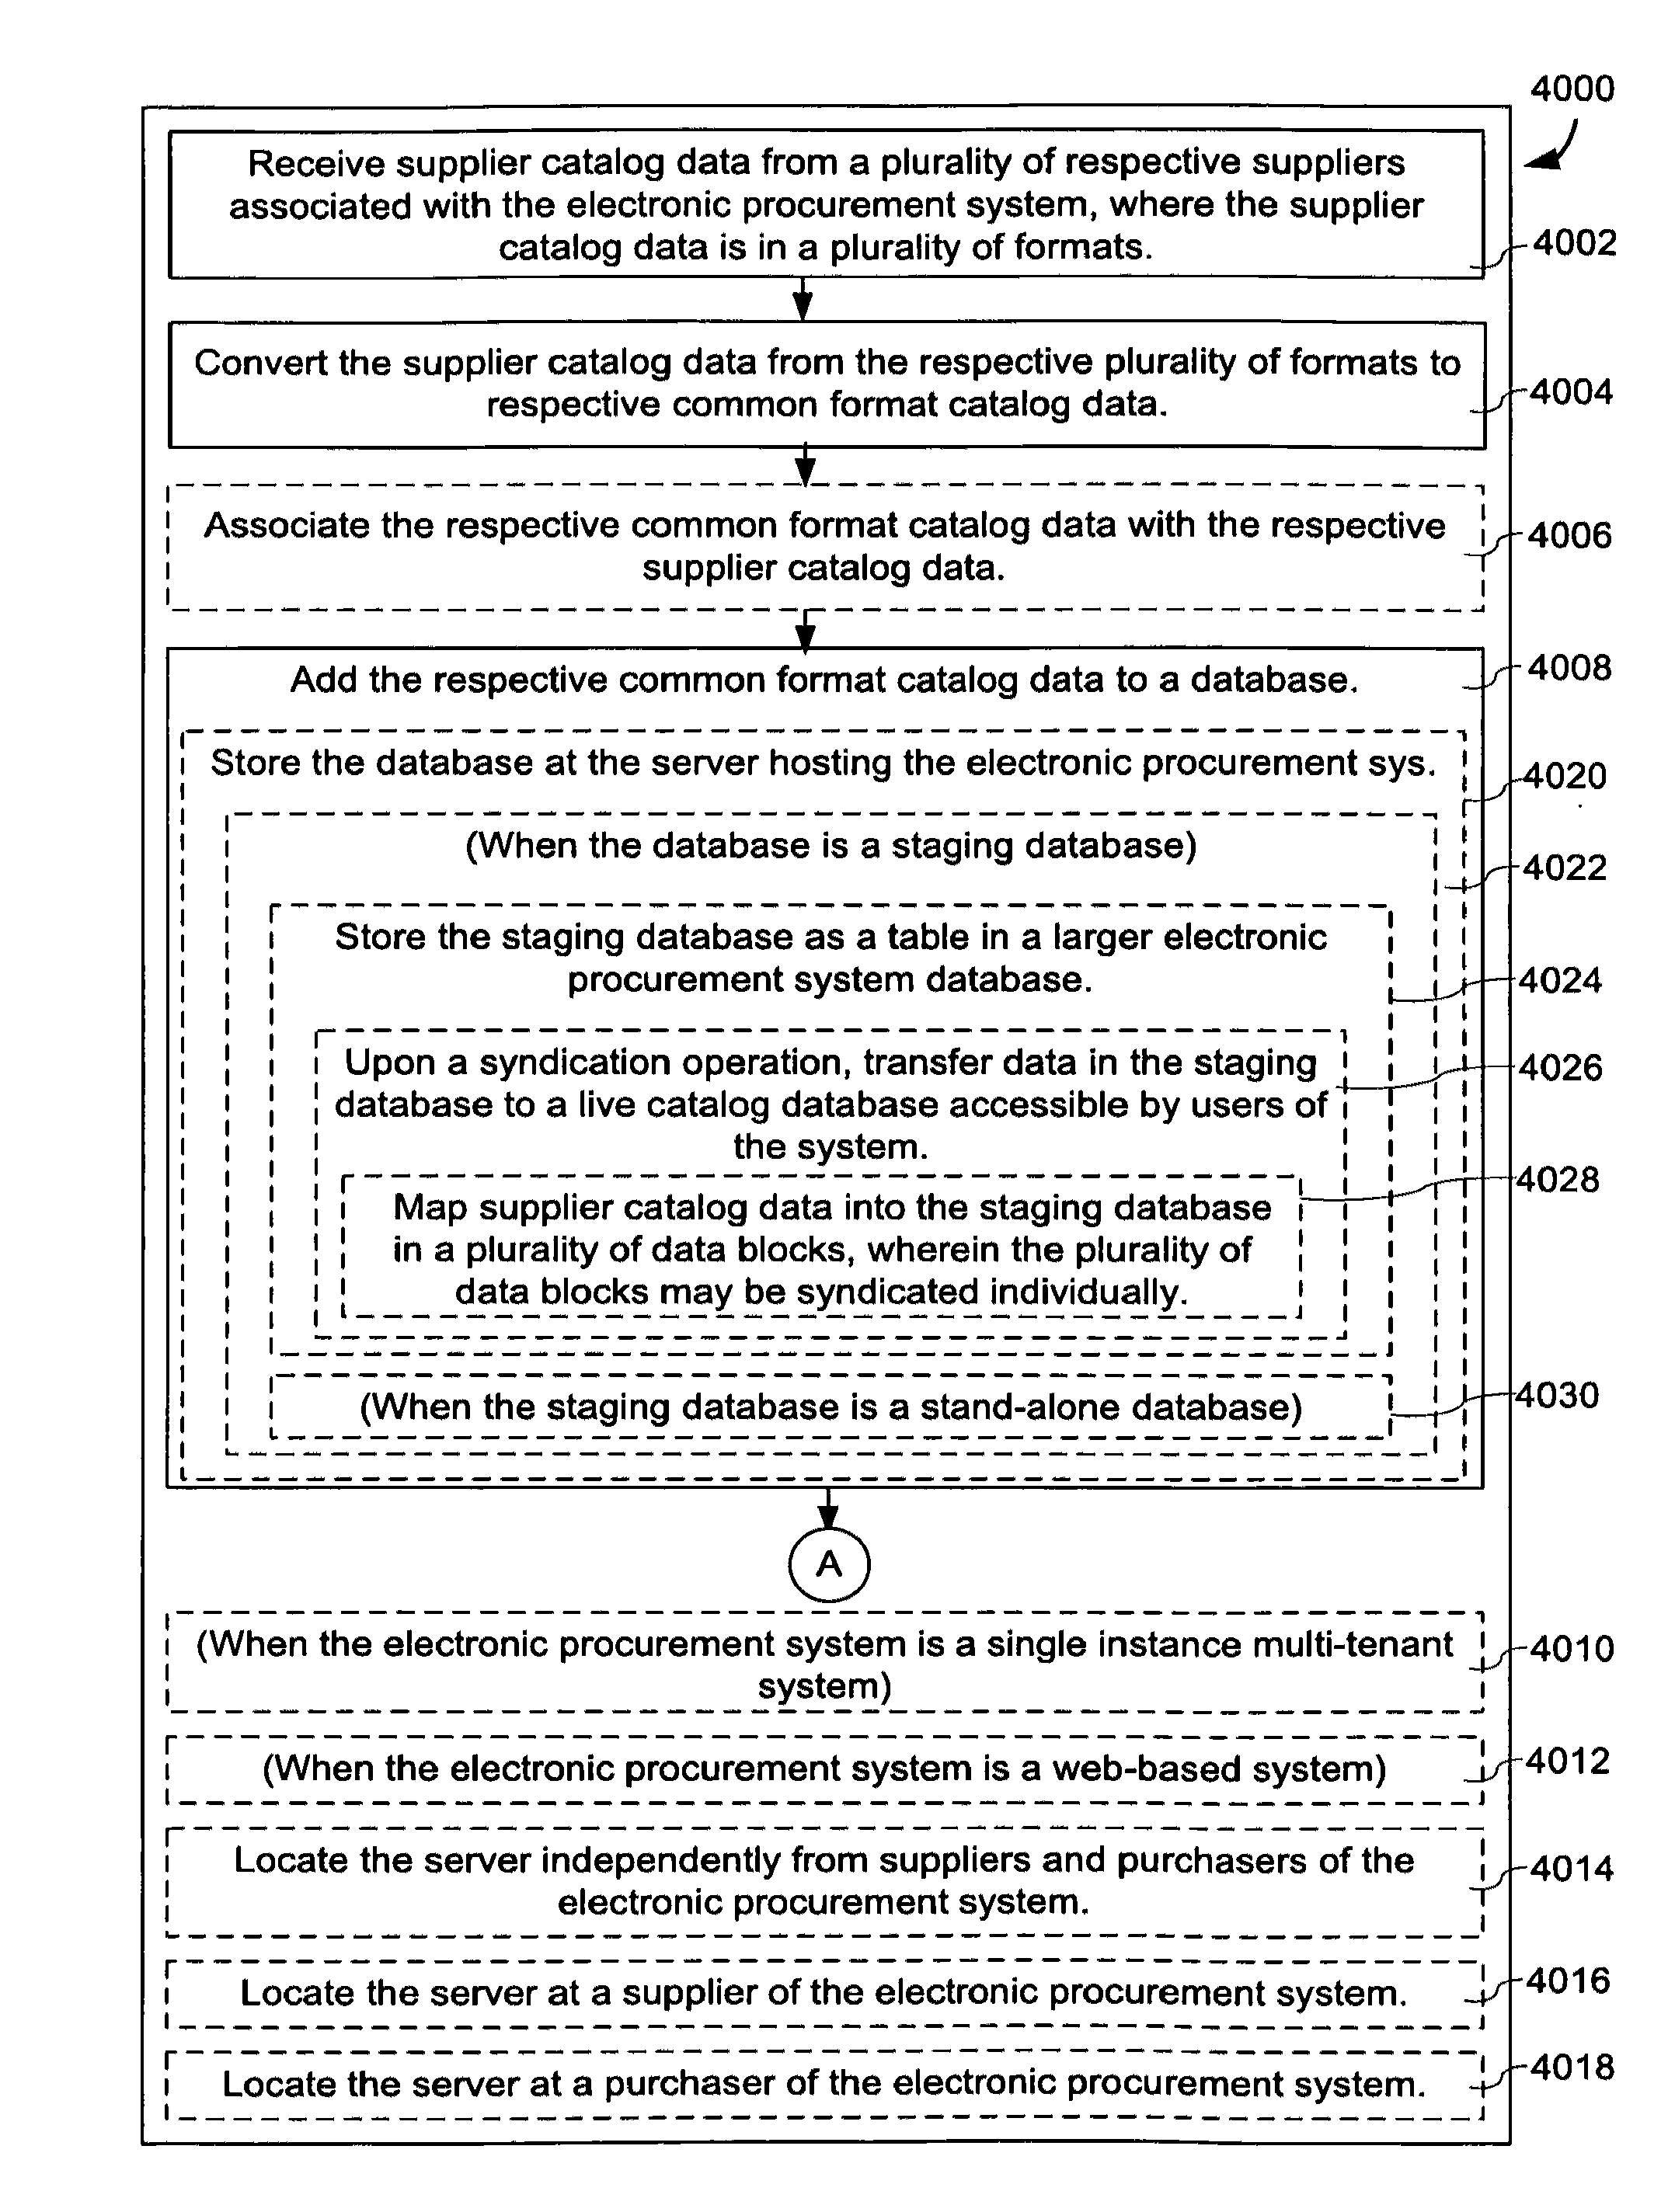 Taxonomy and data structure for an electronic procurement system